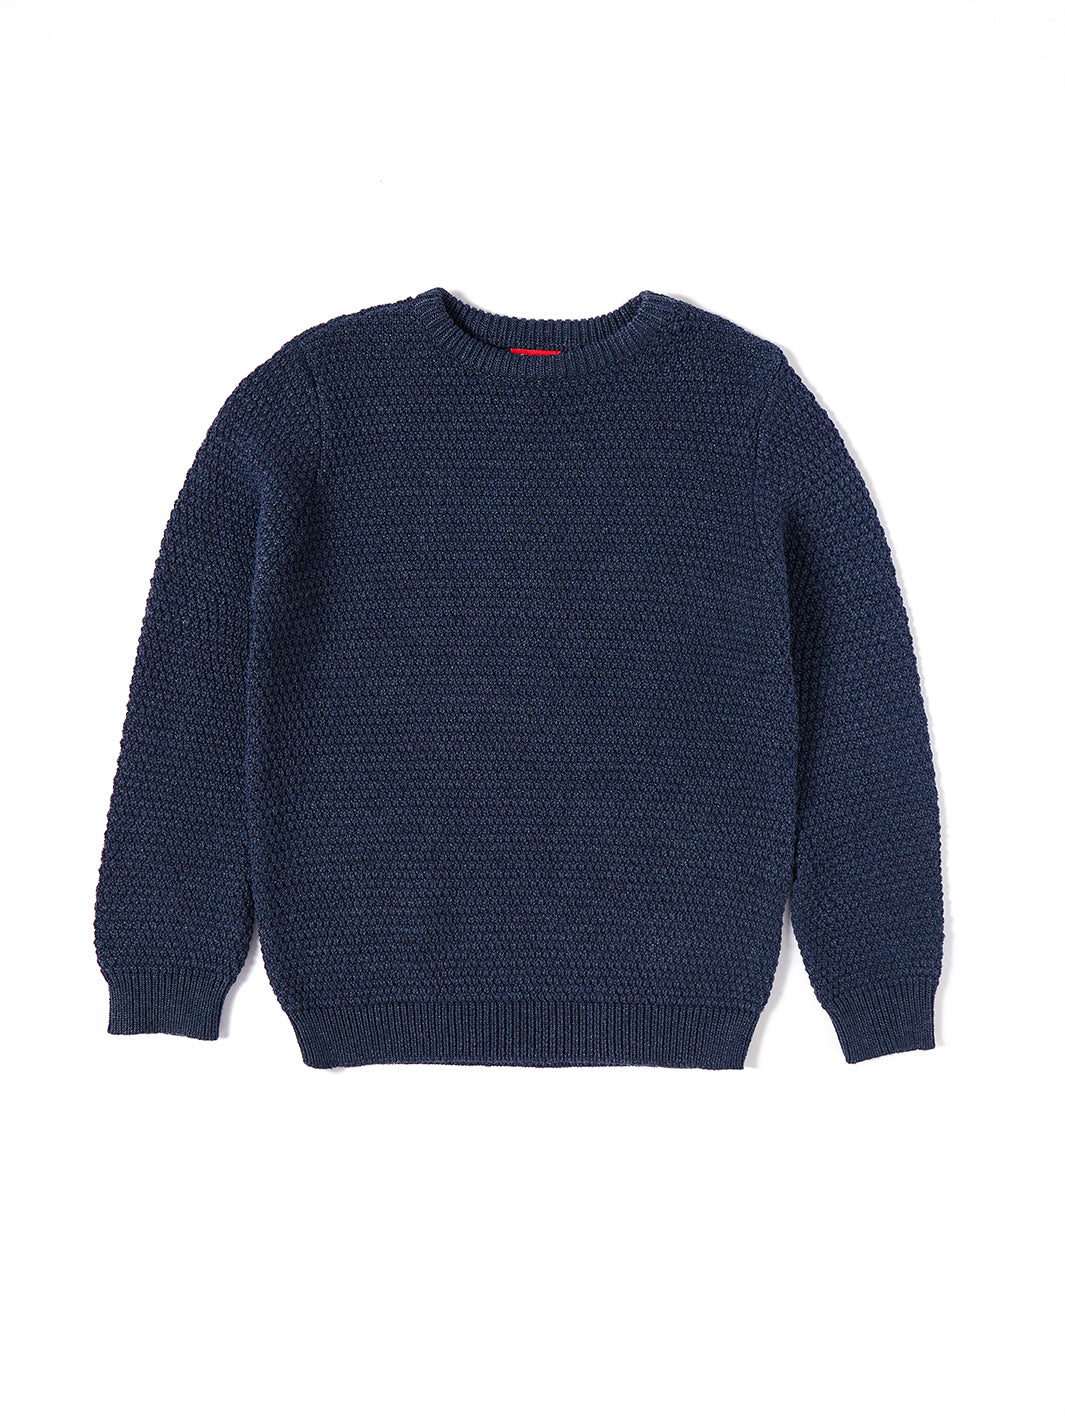 Classic Bubble Knitted Sweater - Blue Grey Mix